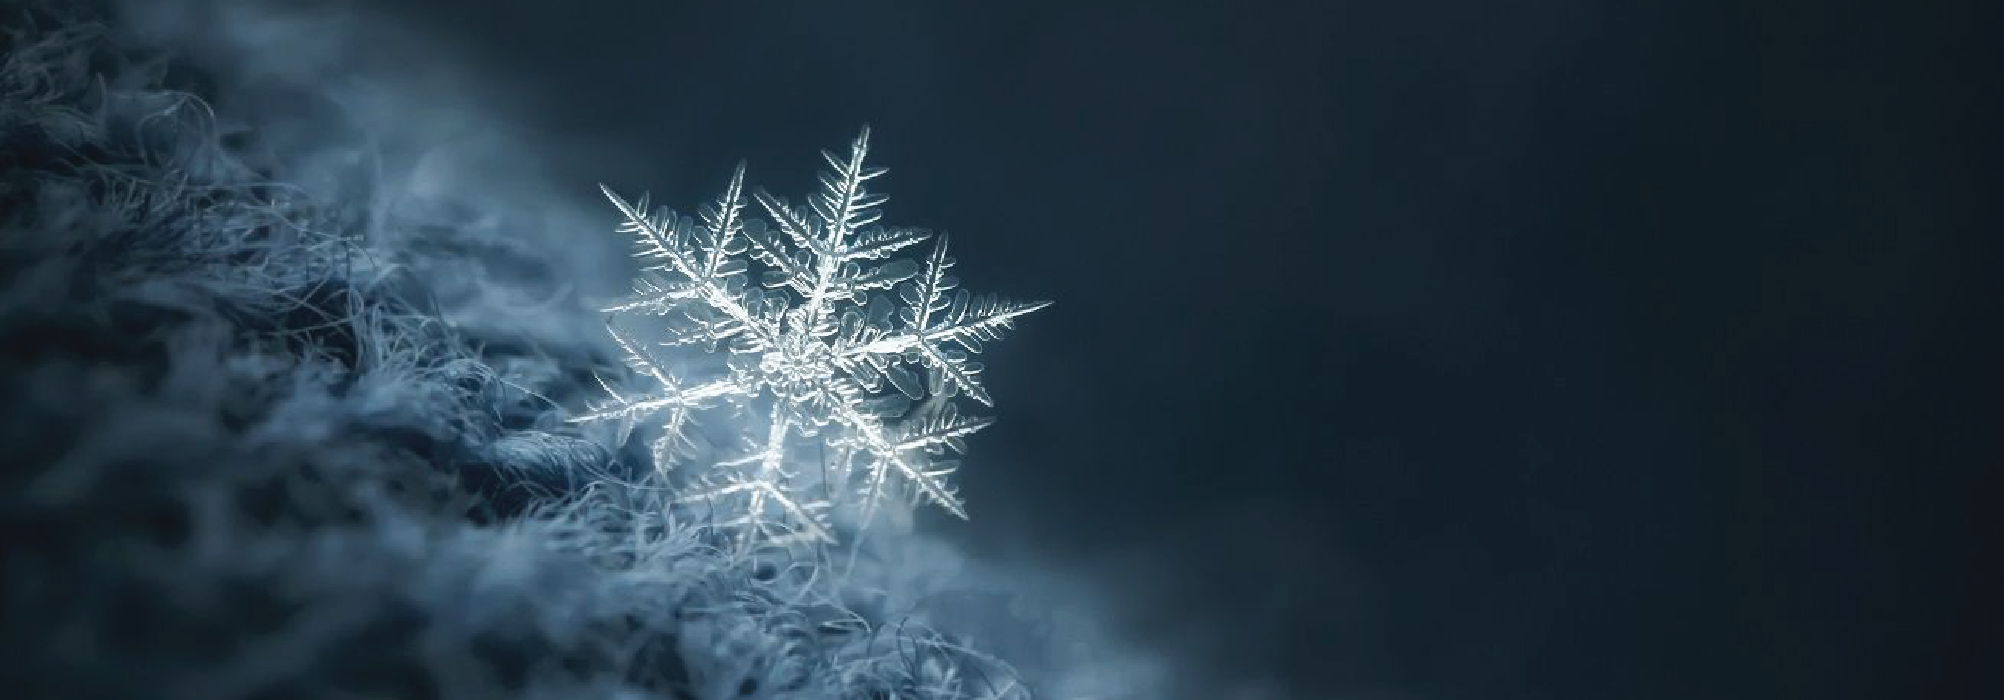 The Pros and Cons of Snowflake Cloud Data Warehouse